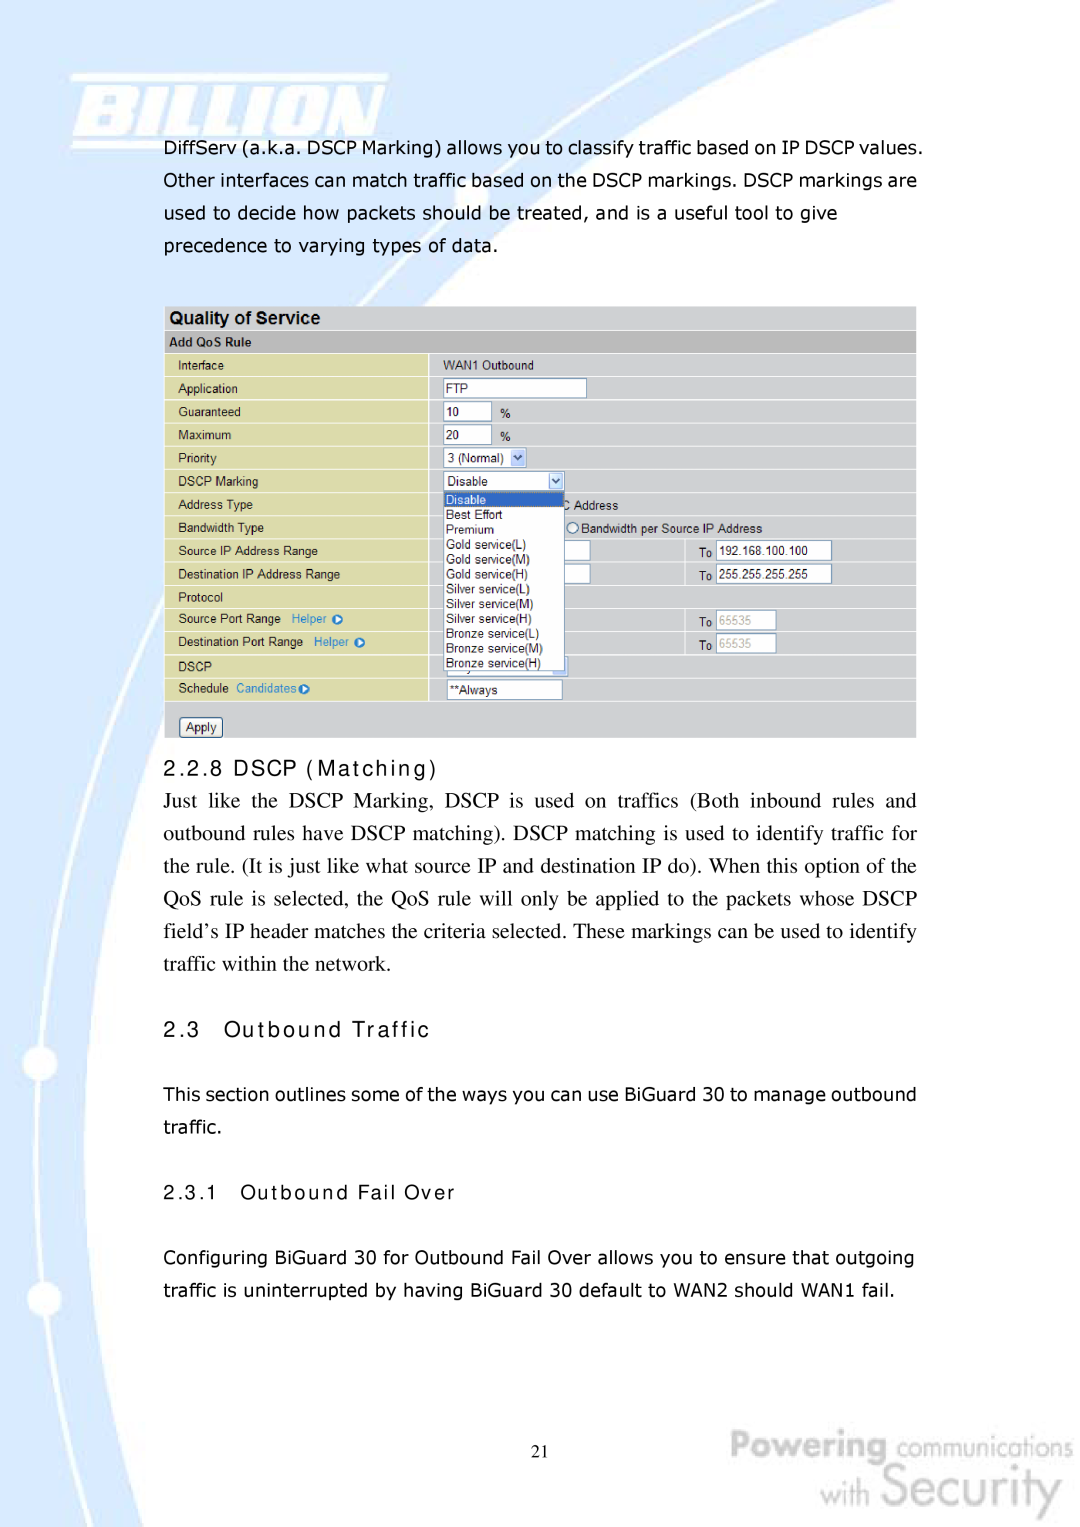 Billion Electric Company 30 user manual DSCP Matching, Outbound Traffic, Outbound Fail Over 